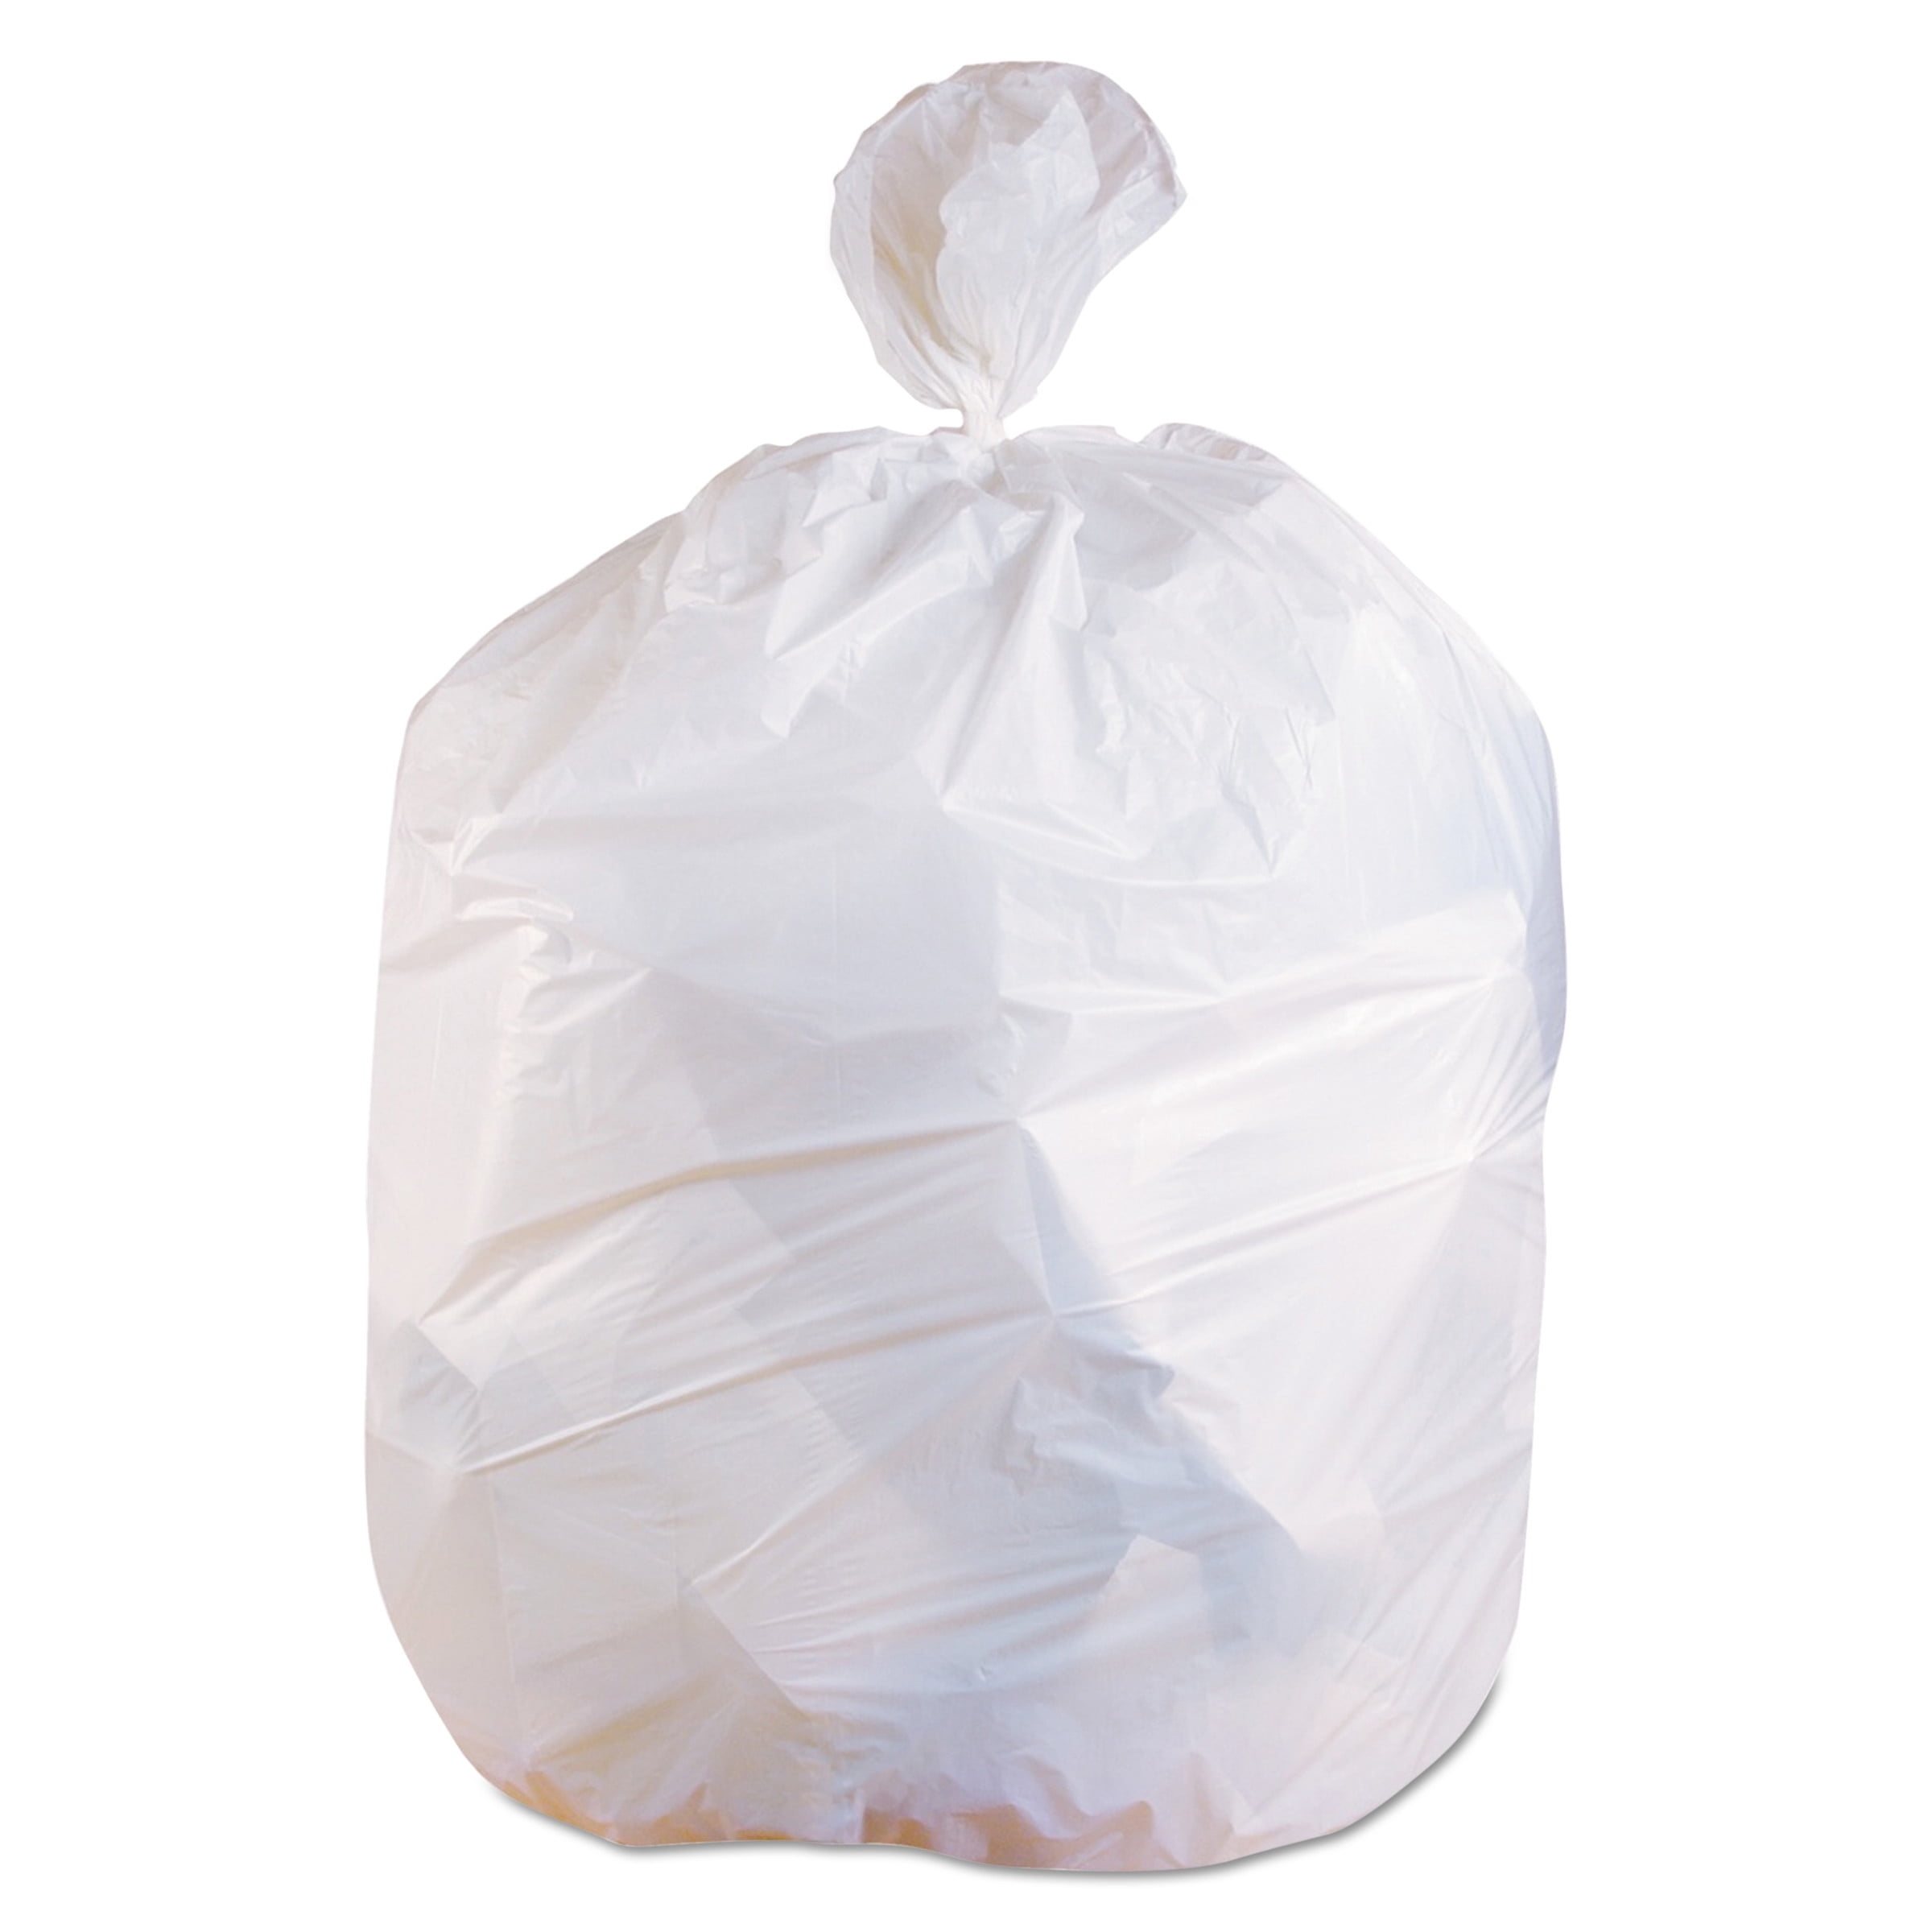 IRONCLAD 12L DRAWSTRING SMALL STEP CAN TRASH BAG LINER (3.2 GAL / 12 L) SIZE  B, 20 COUNT - GTIN/EAN/UPC 11217000110 - Product Details - Cosmos